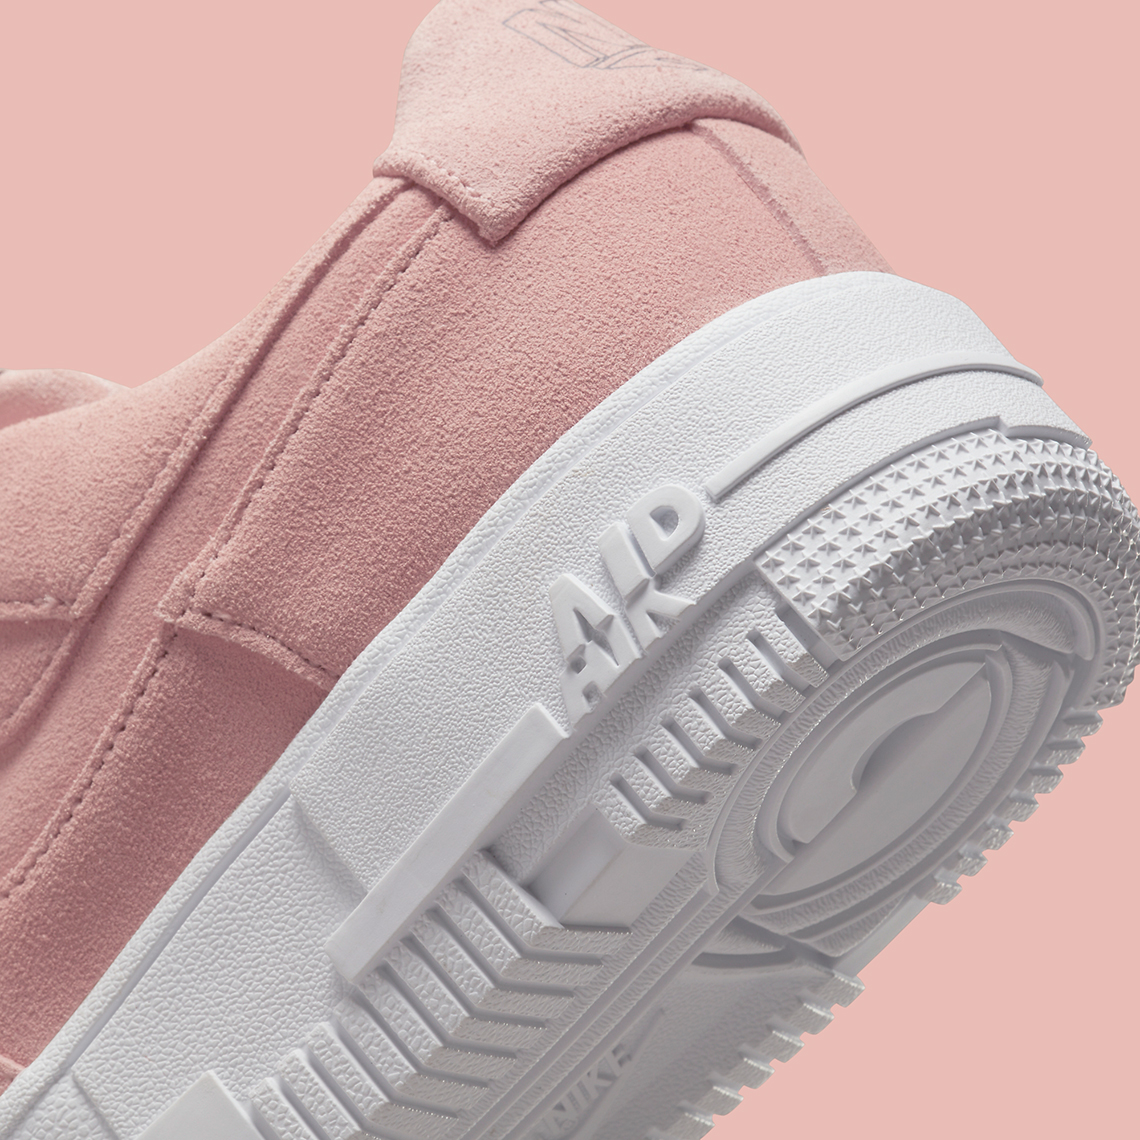 Nike Air Force 1 Pink Suede Dq5570 600 7